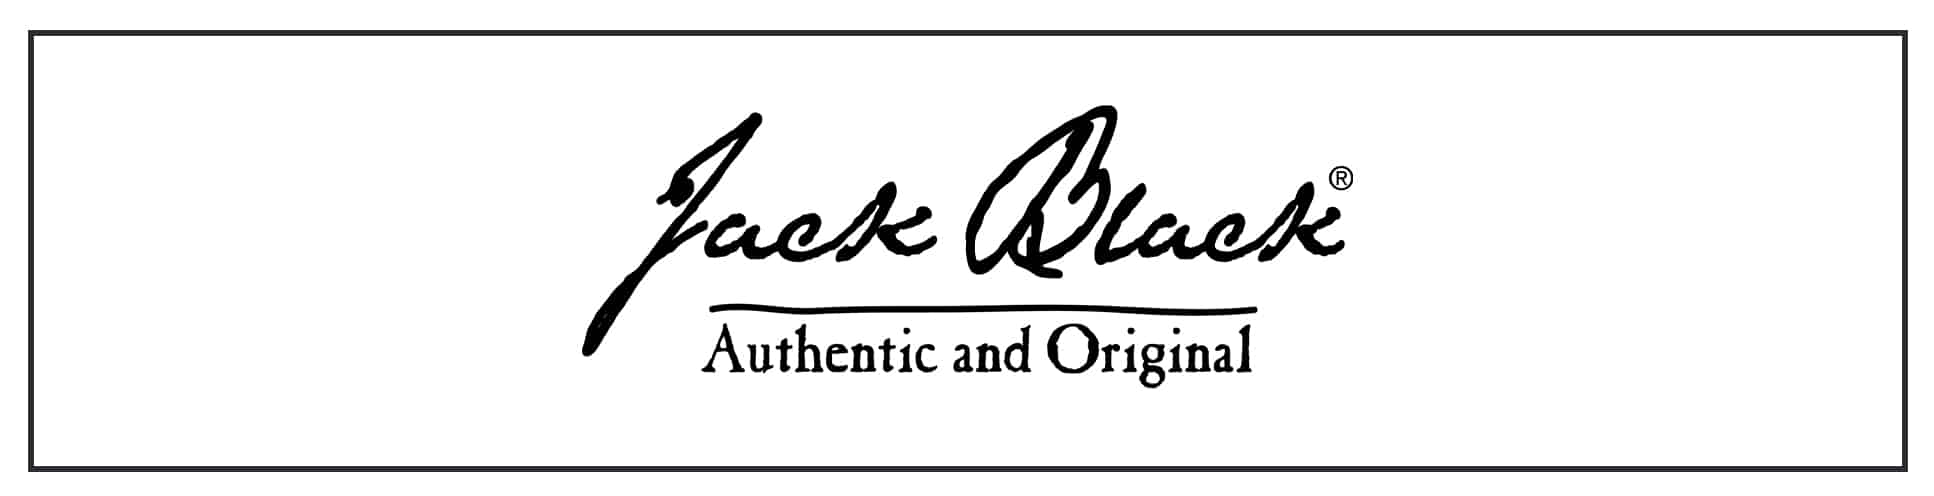 The logo for jack black authentic and original.